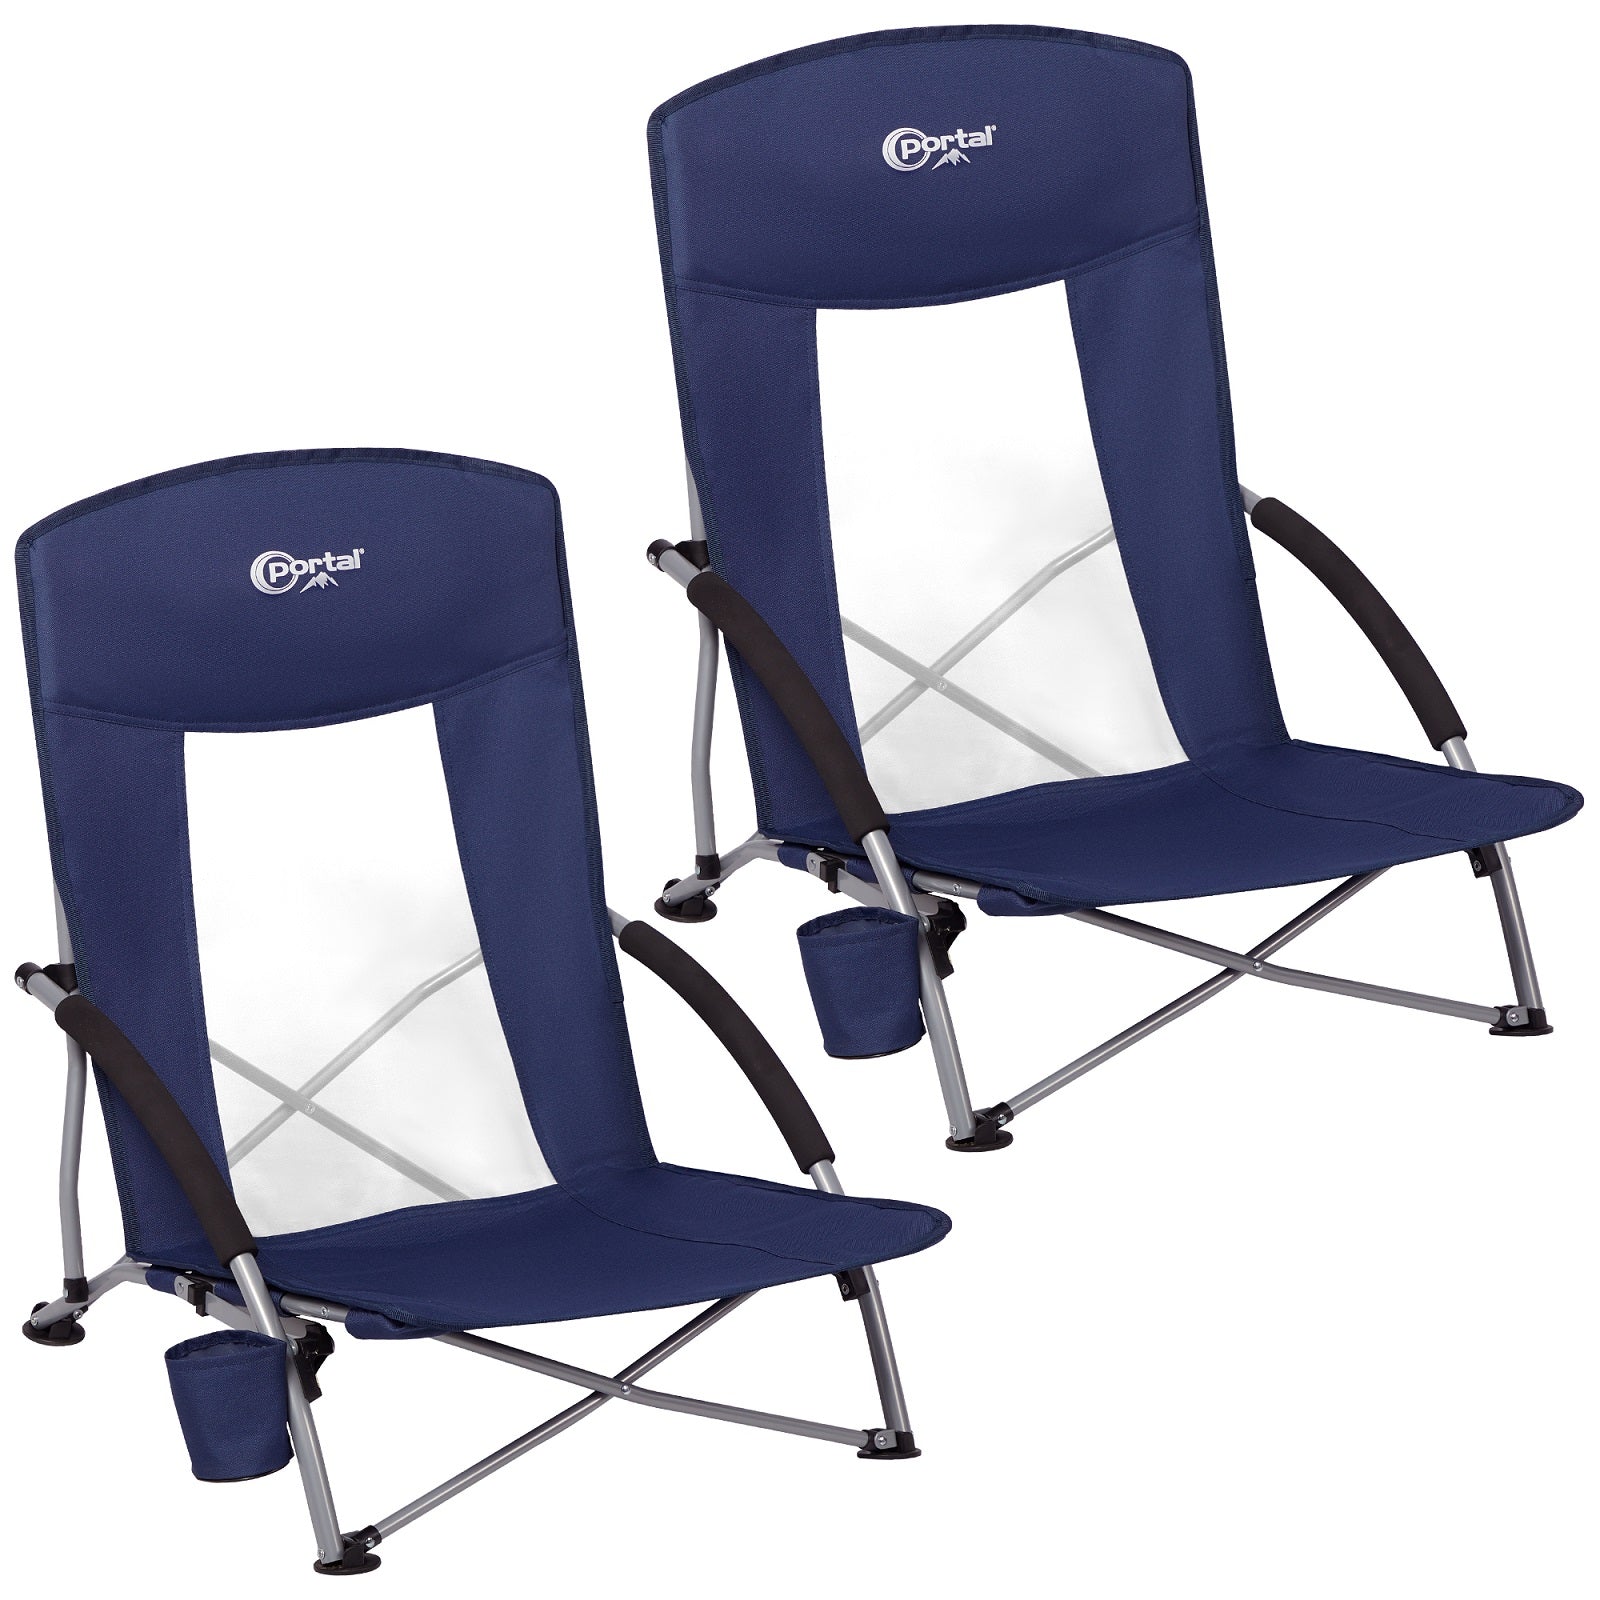 Portal Outdoors High Back Low Beach Chair-2 Pack